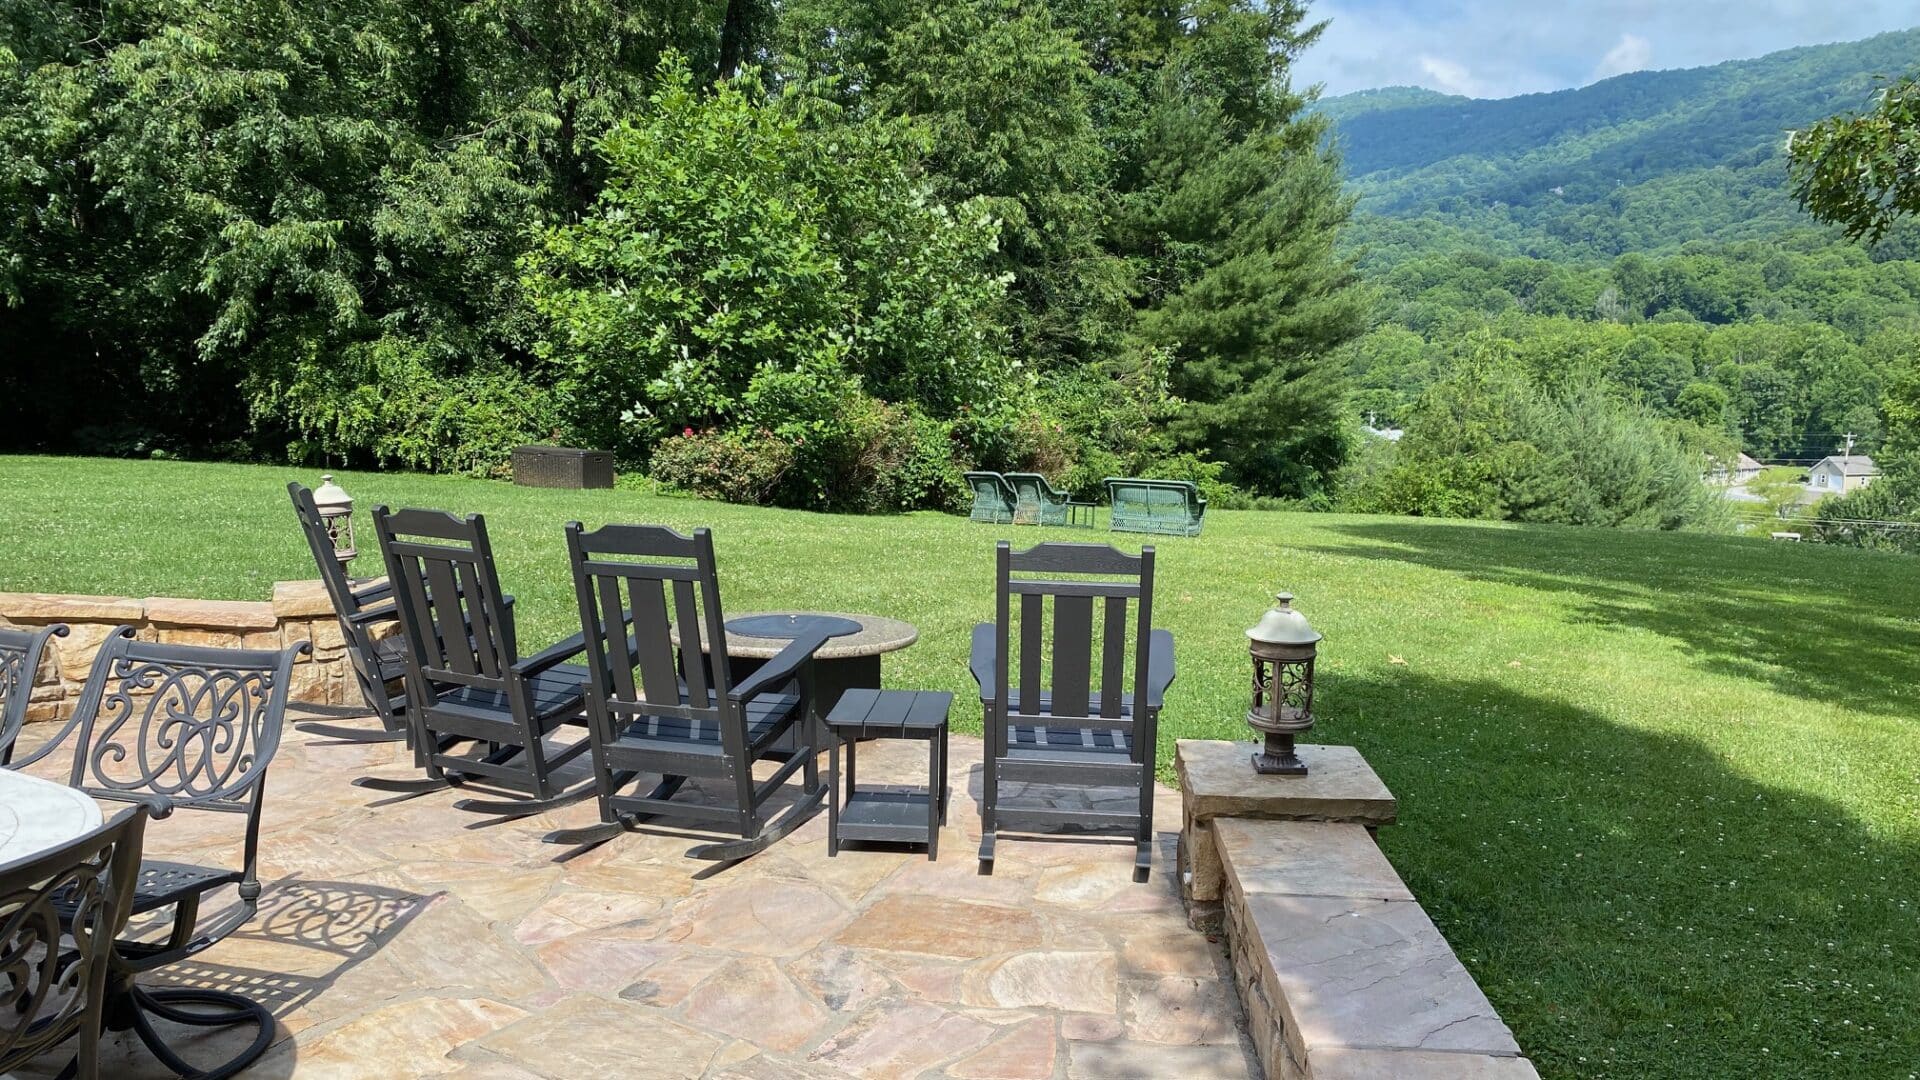 Chairs & Fire Pit at the Andon-Reid Inn B&B in Waynesville, NC